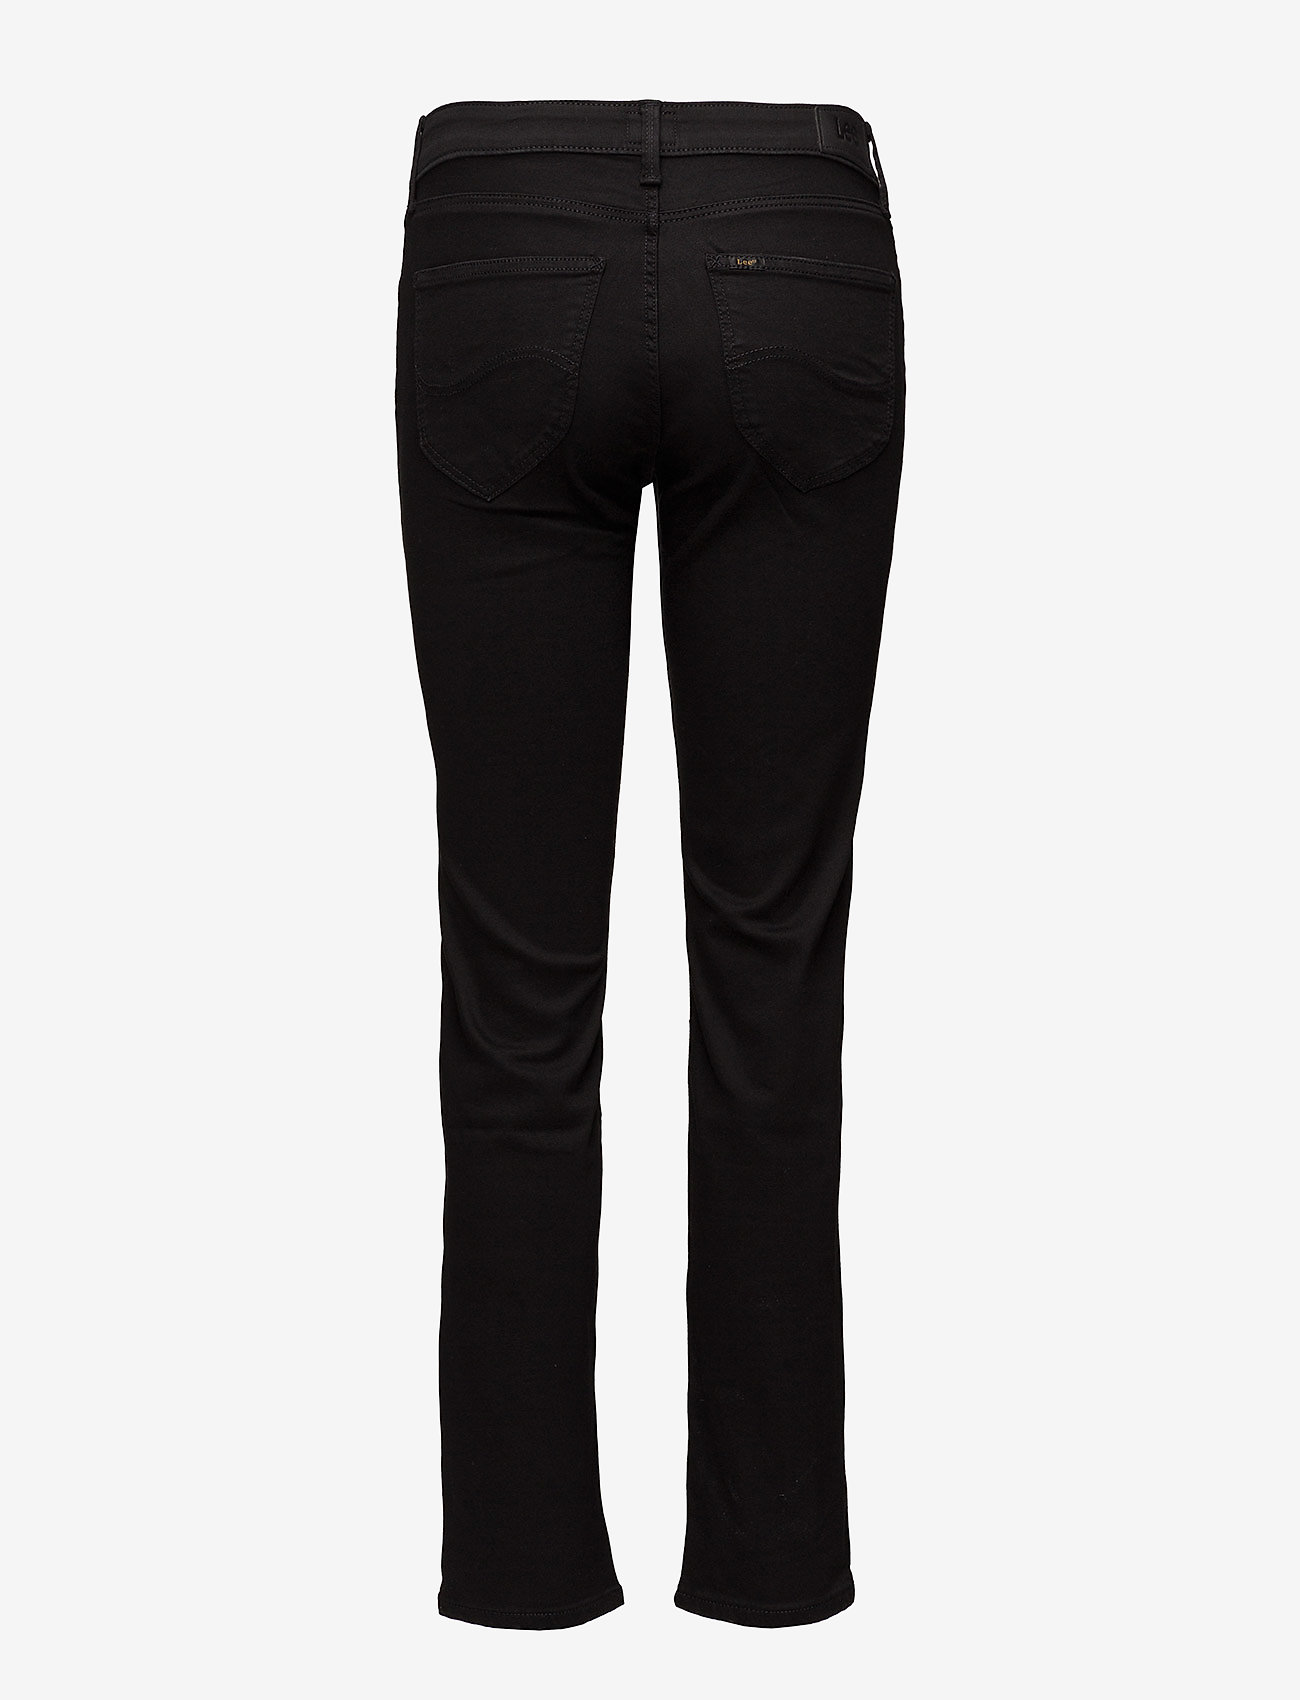 Lee Jeans - Marion Straight - straight jeans - black rinse - 1